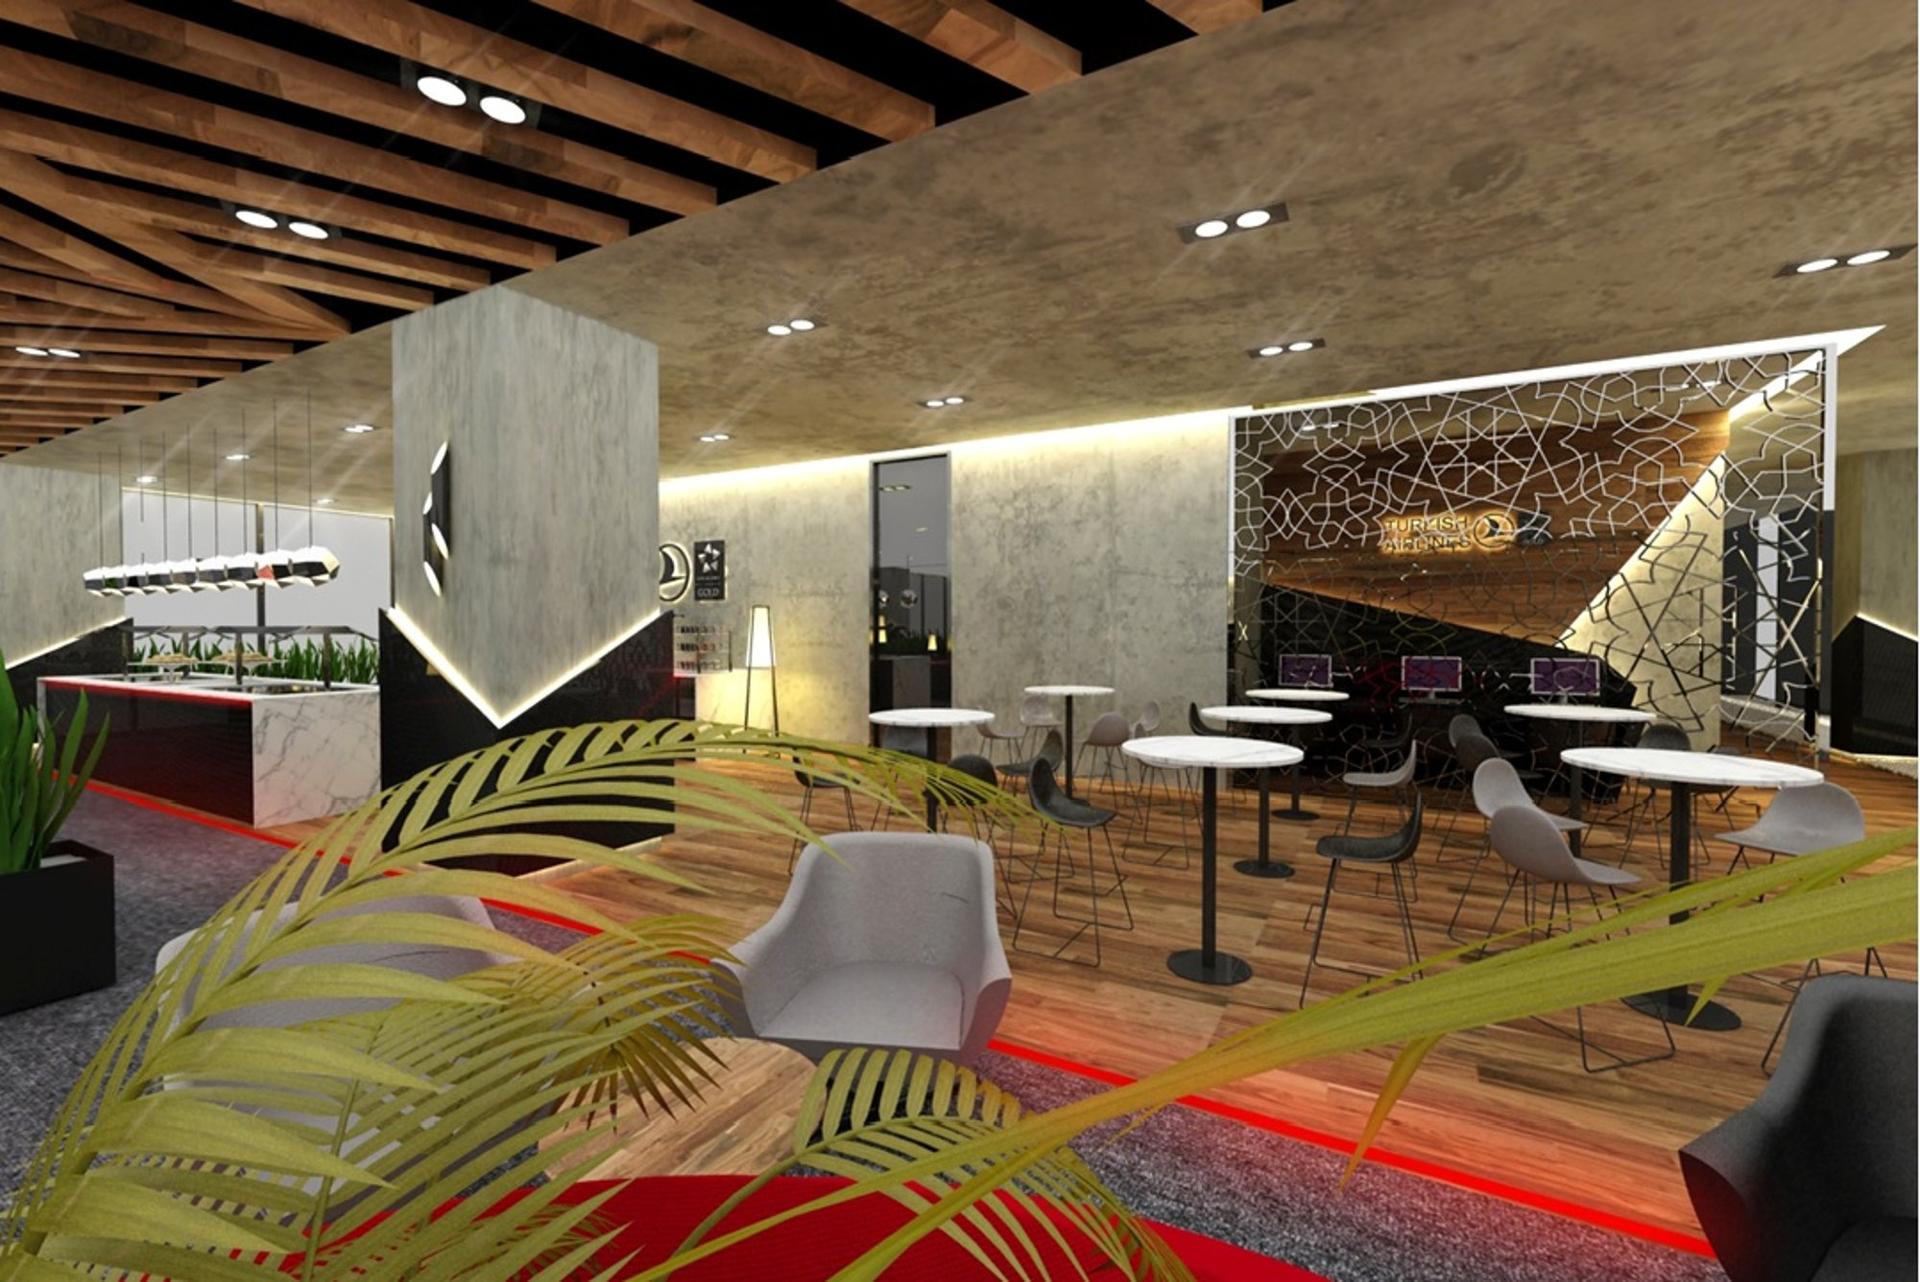 Turkish Airlines CIP Lounge (Business Lounge) image 26 of 27